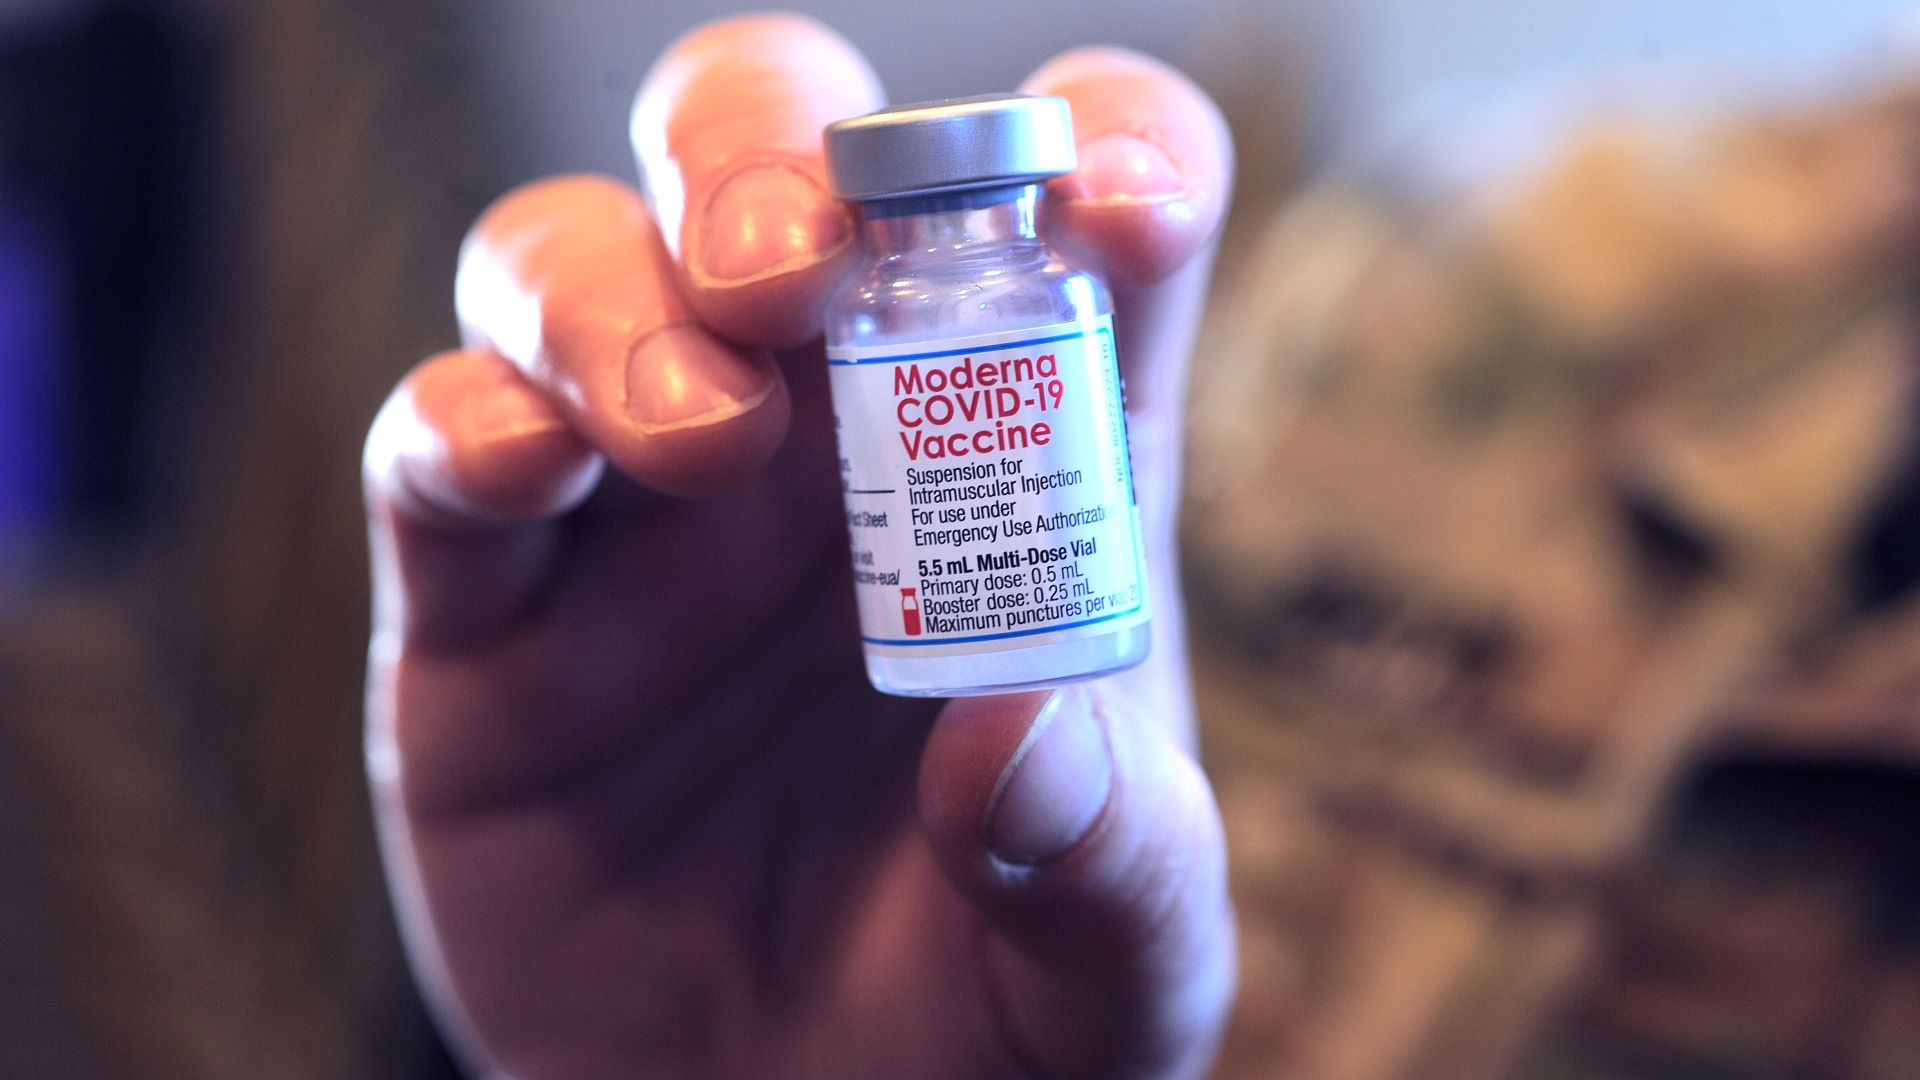 A hand holds up a small vial of a COVID-19 vaccine